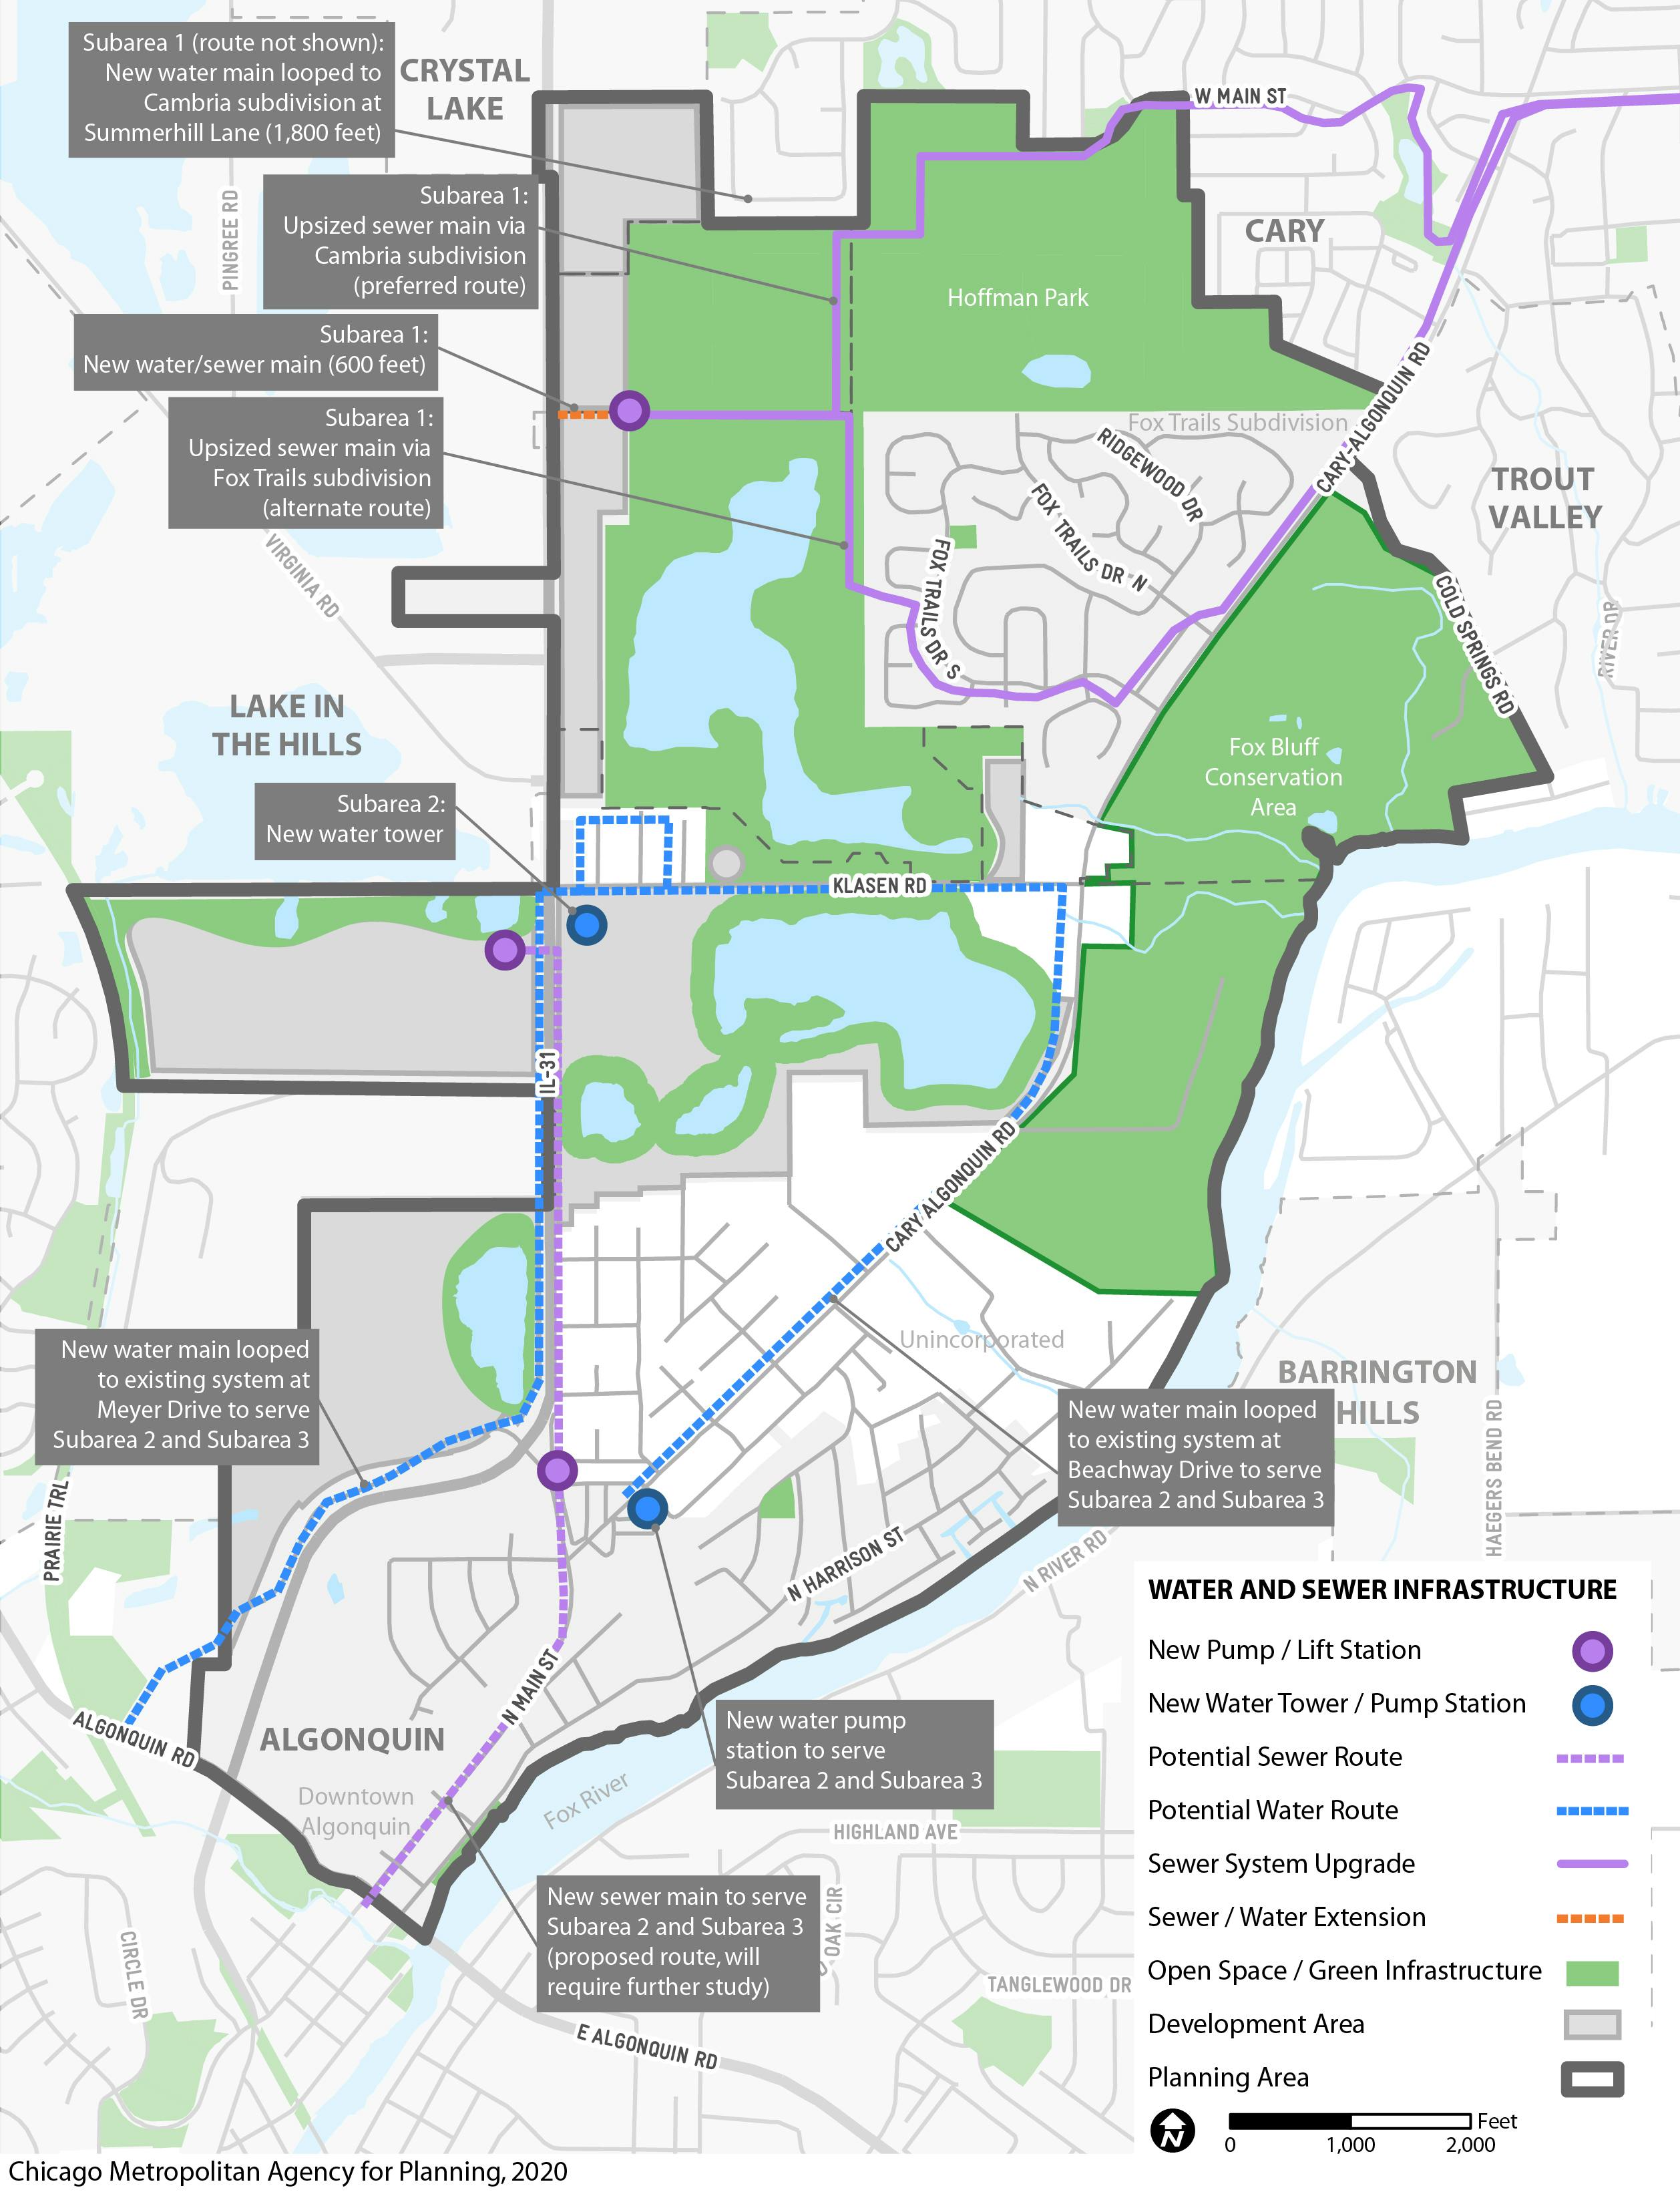 Water and Sewer Infrastructure plan